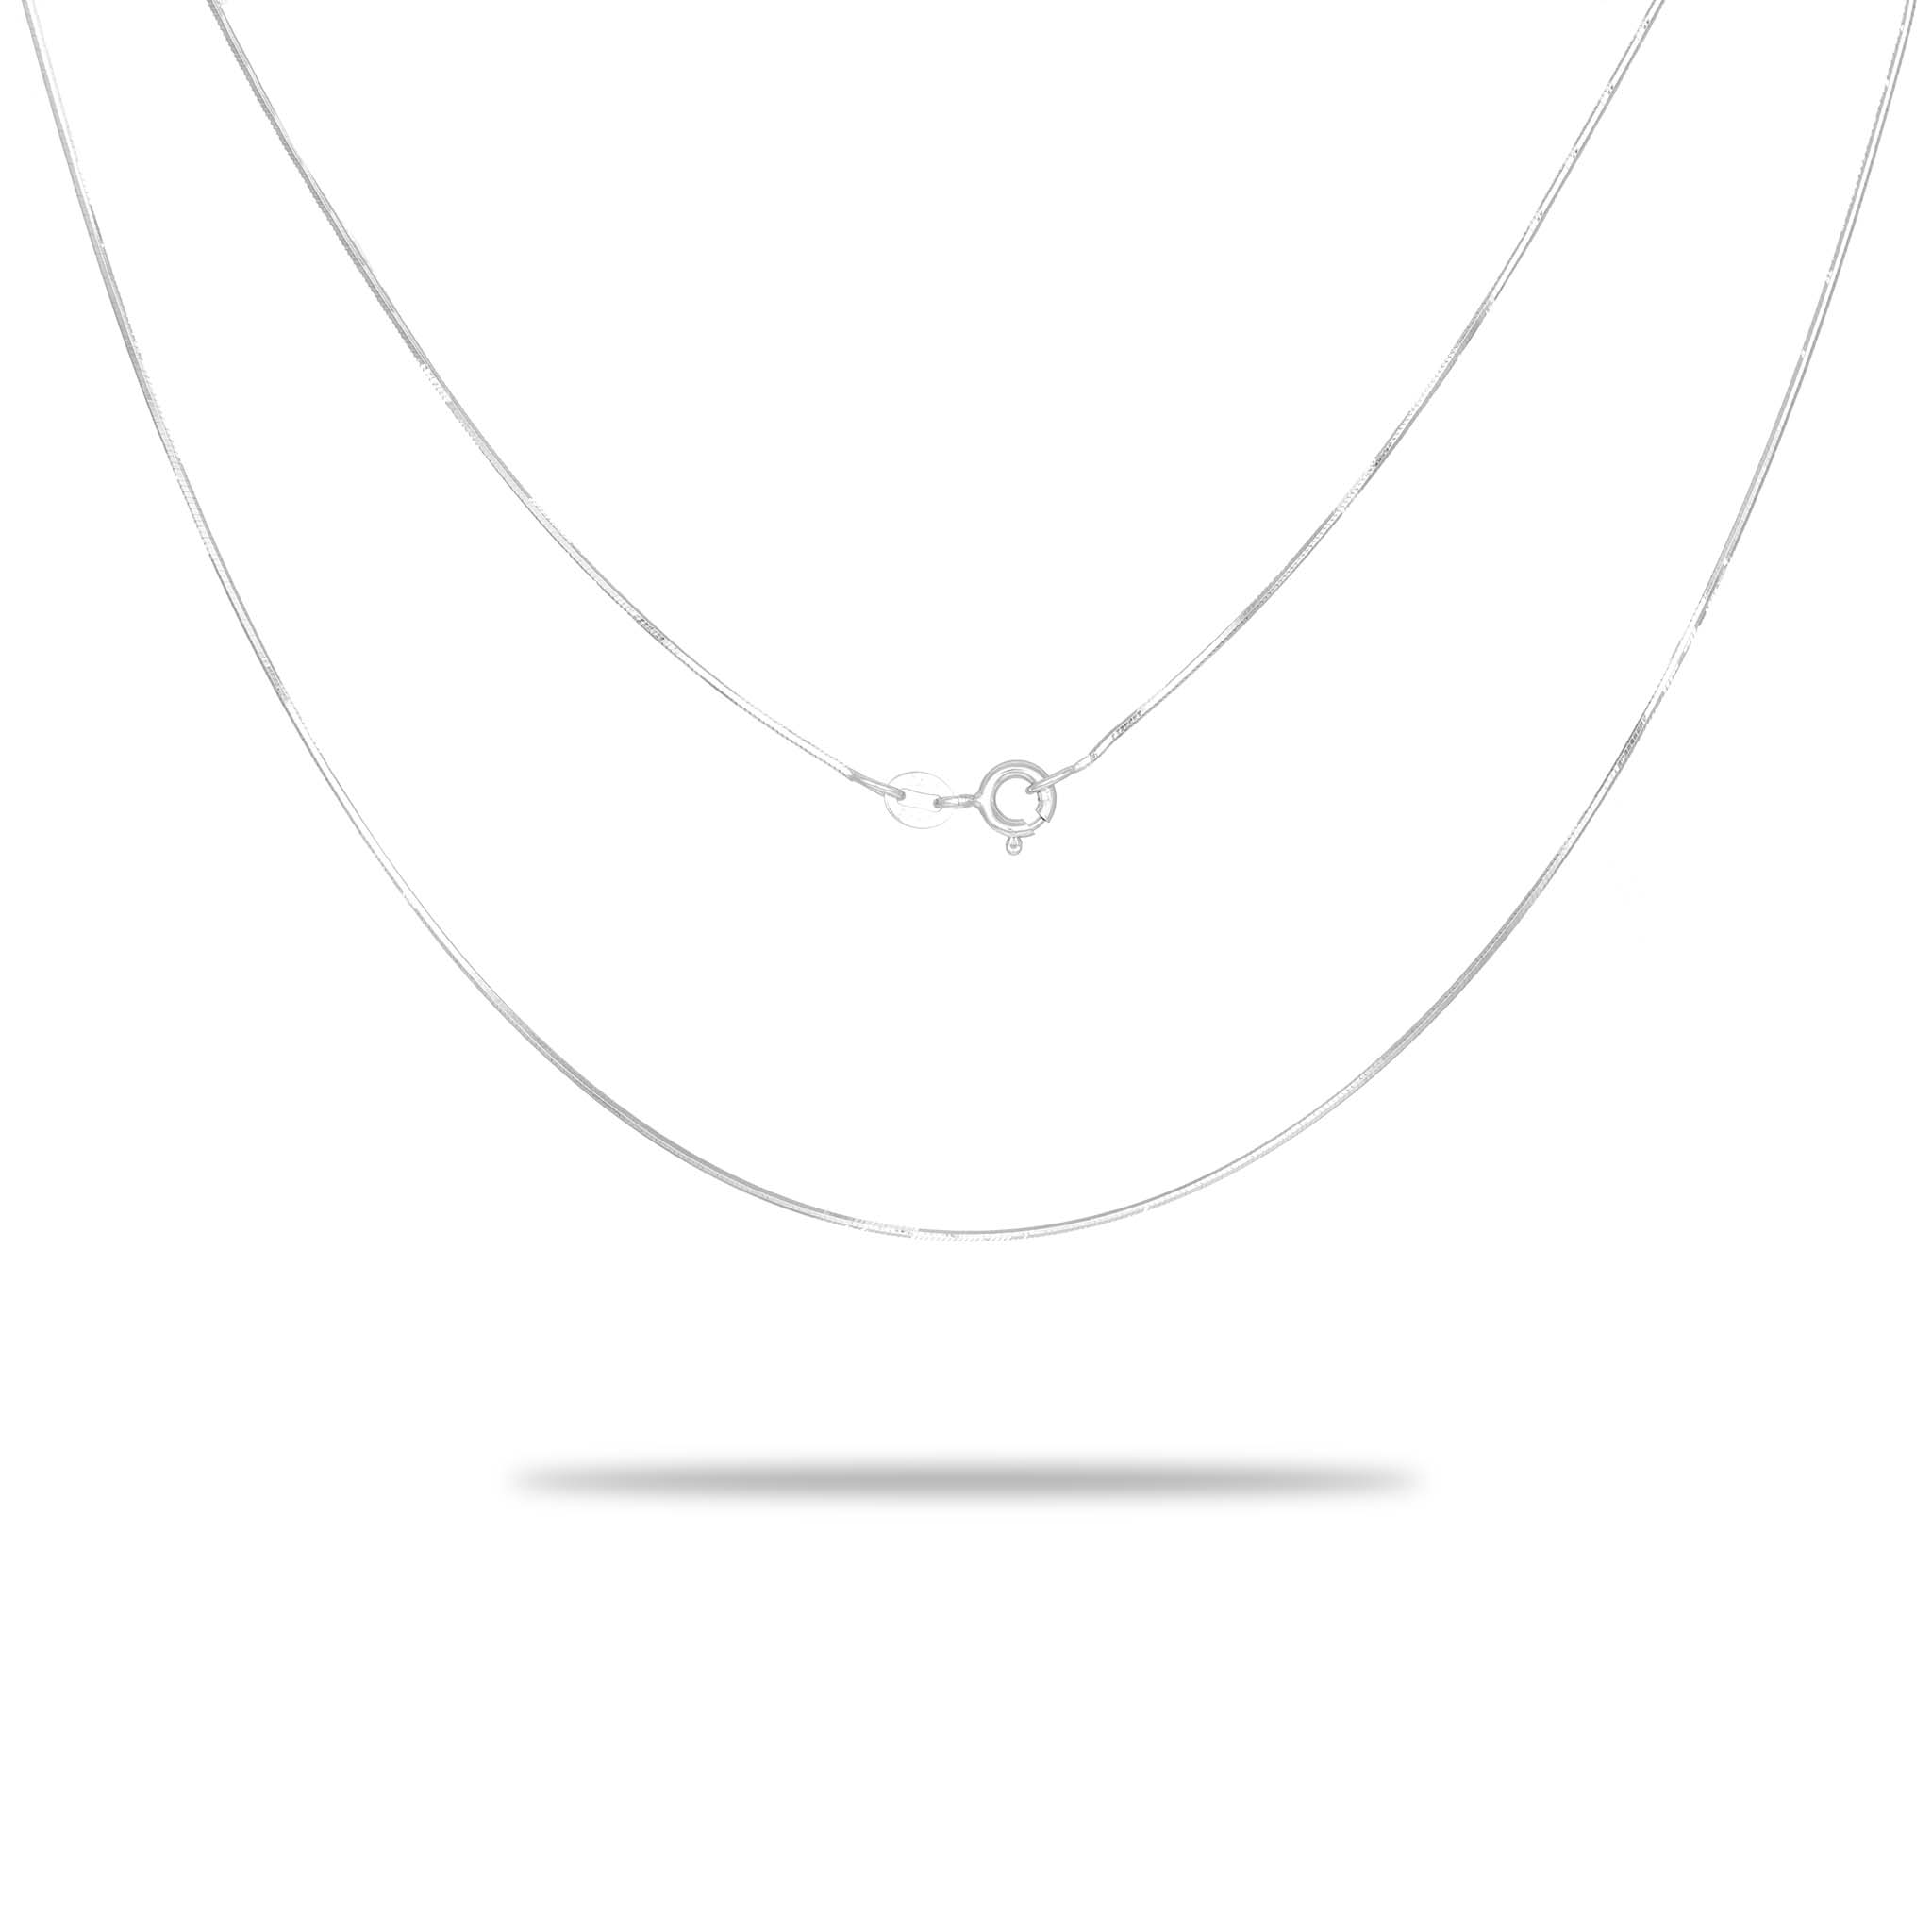 1.0mm Snake Chain in Sterling Silver - Maui Divers Jewelry